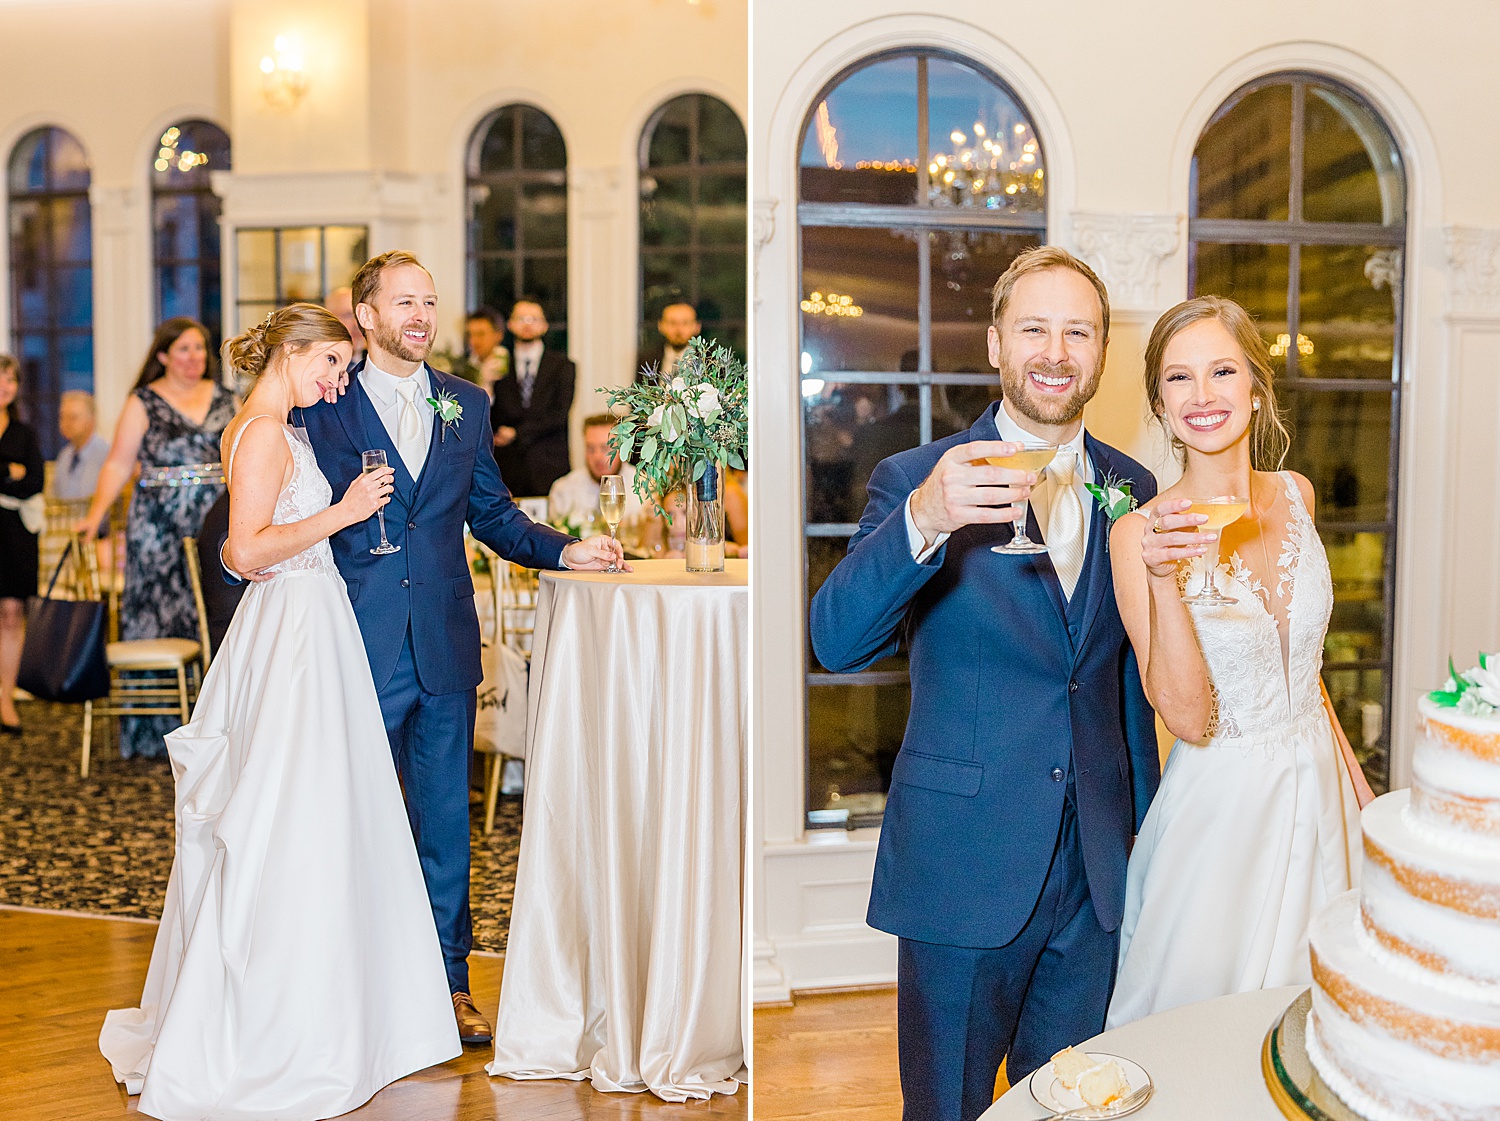 couple share toast at their wedding reception at The Florentine Building in Birmingham, AL